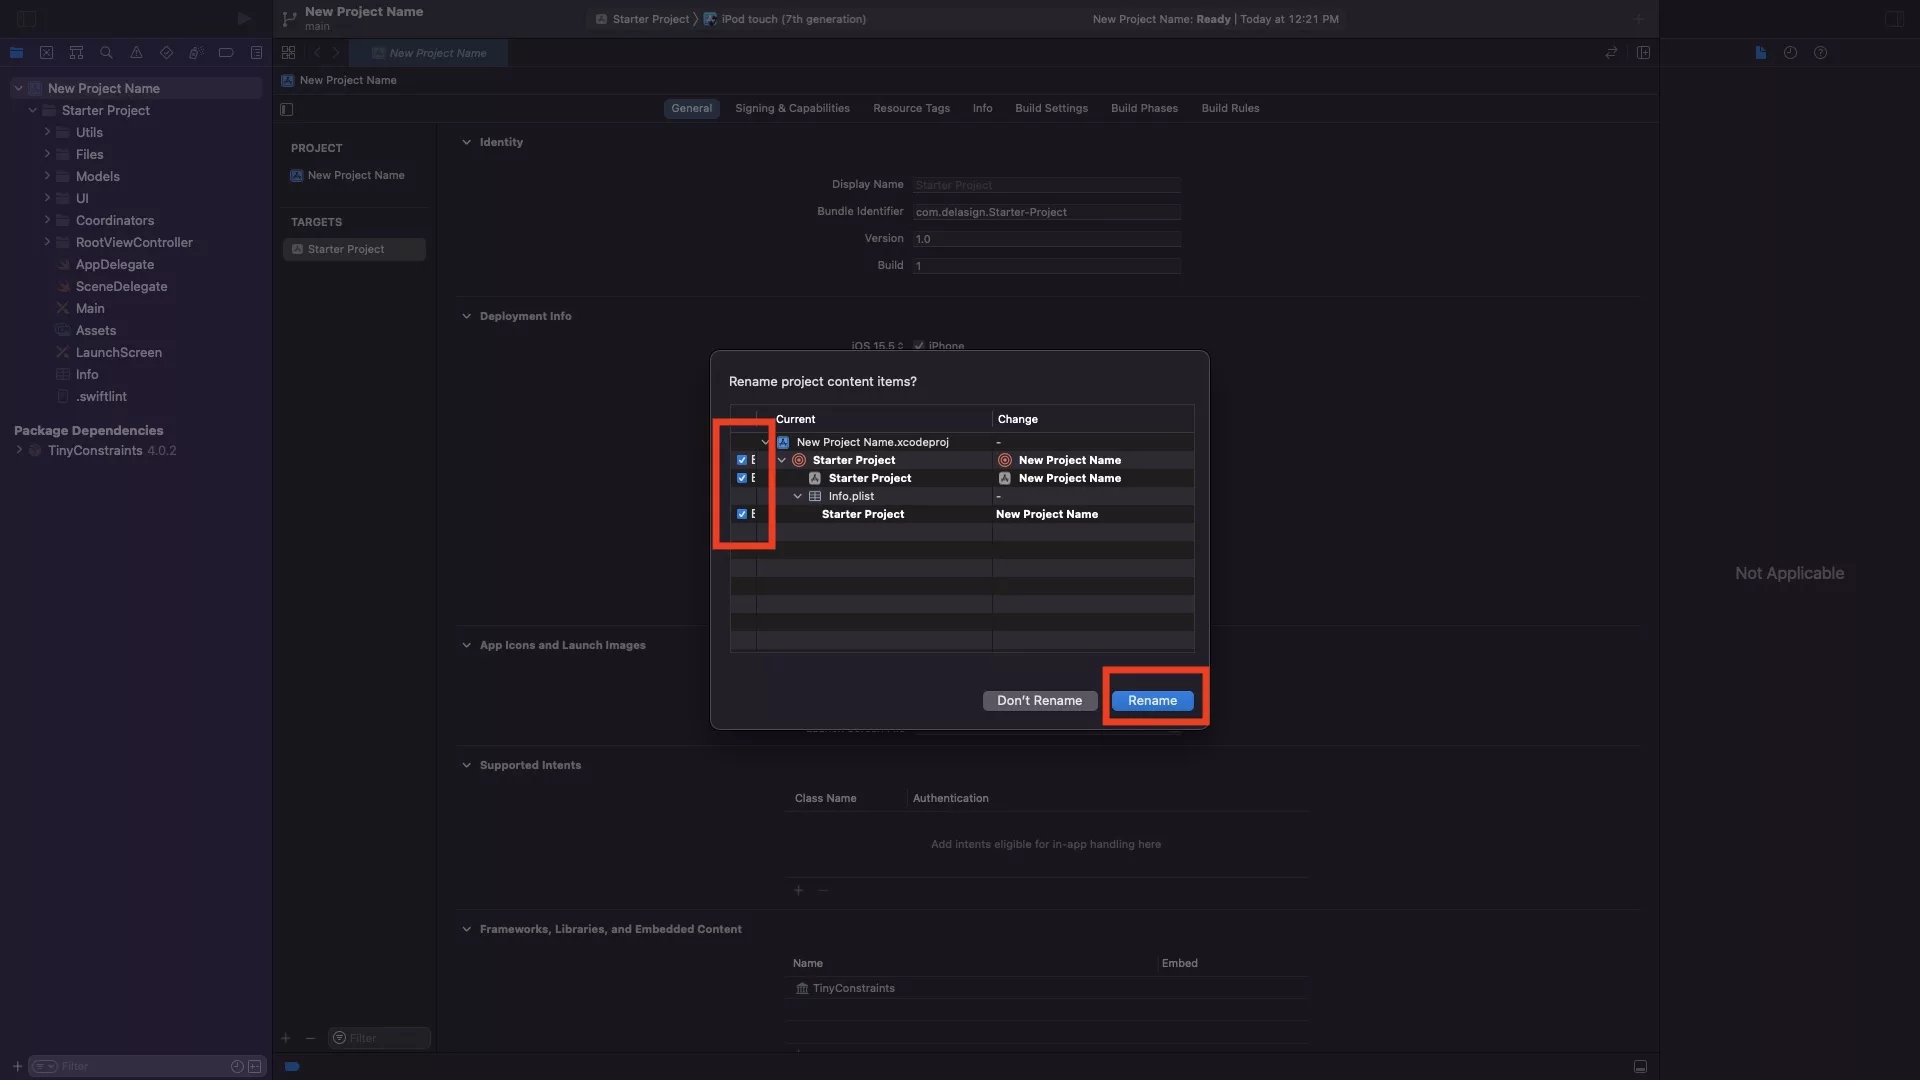 A screenshot showing you how to confirm the rename of your project.